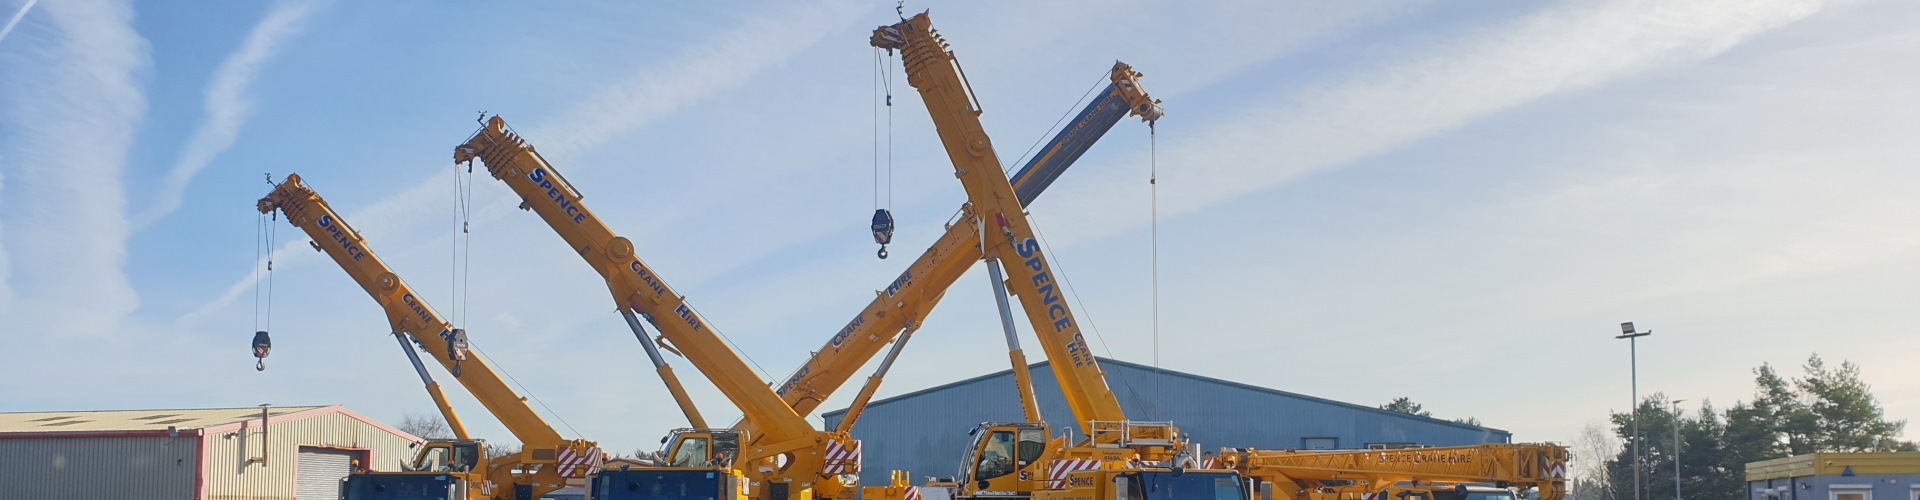 Cranes for hire from Spence Crane Hire